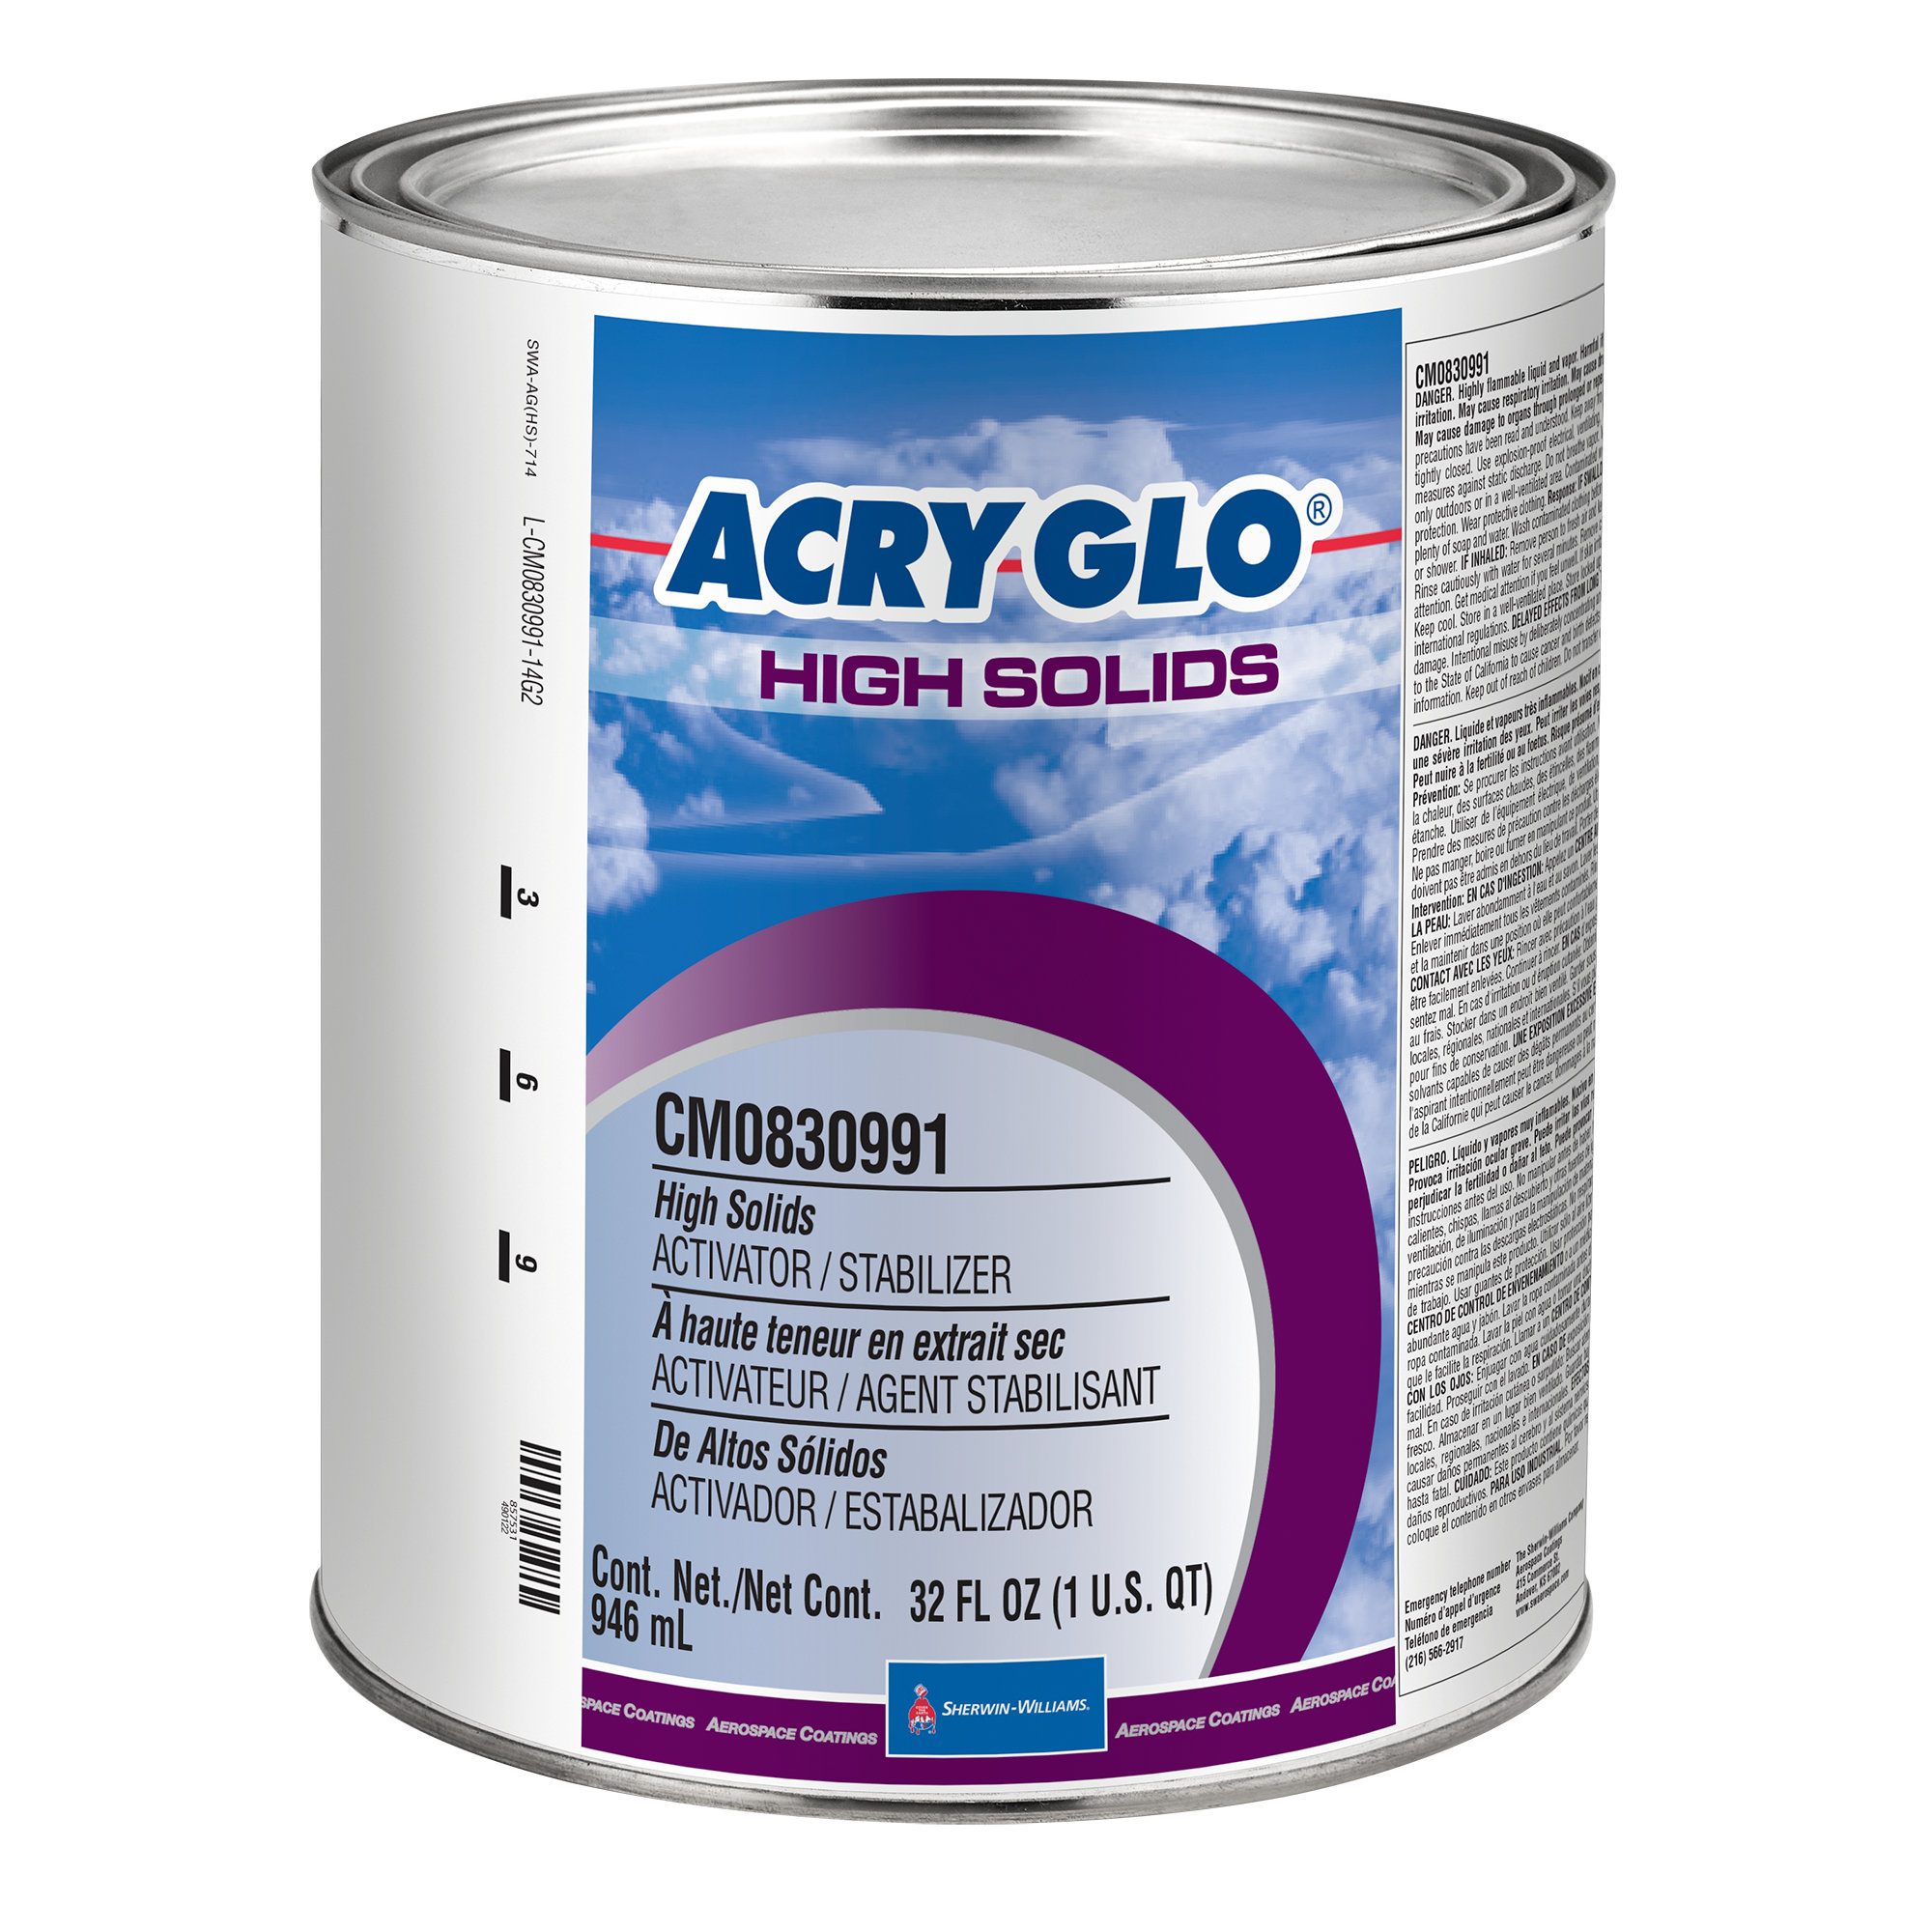 Acry Glo High Solids Stabilizer/Activator | Sherwin-Williams